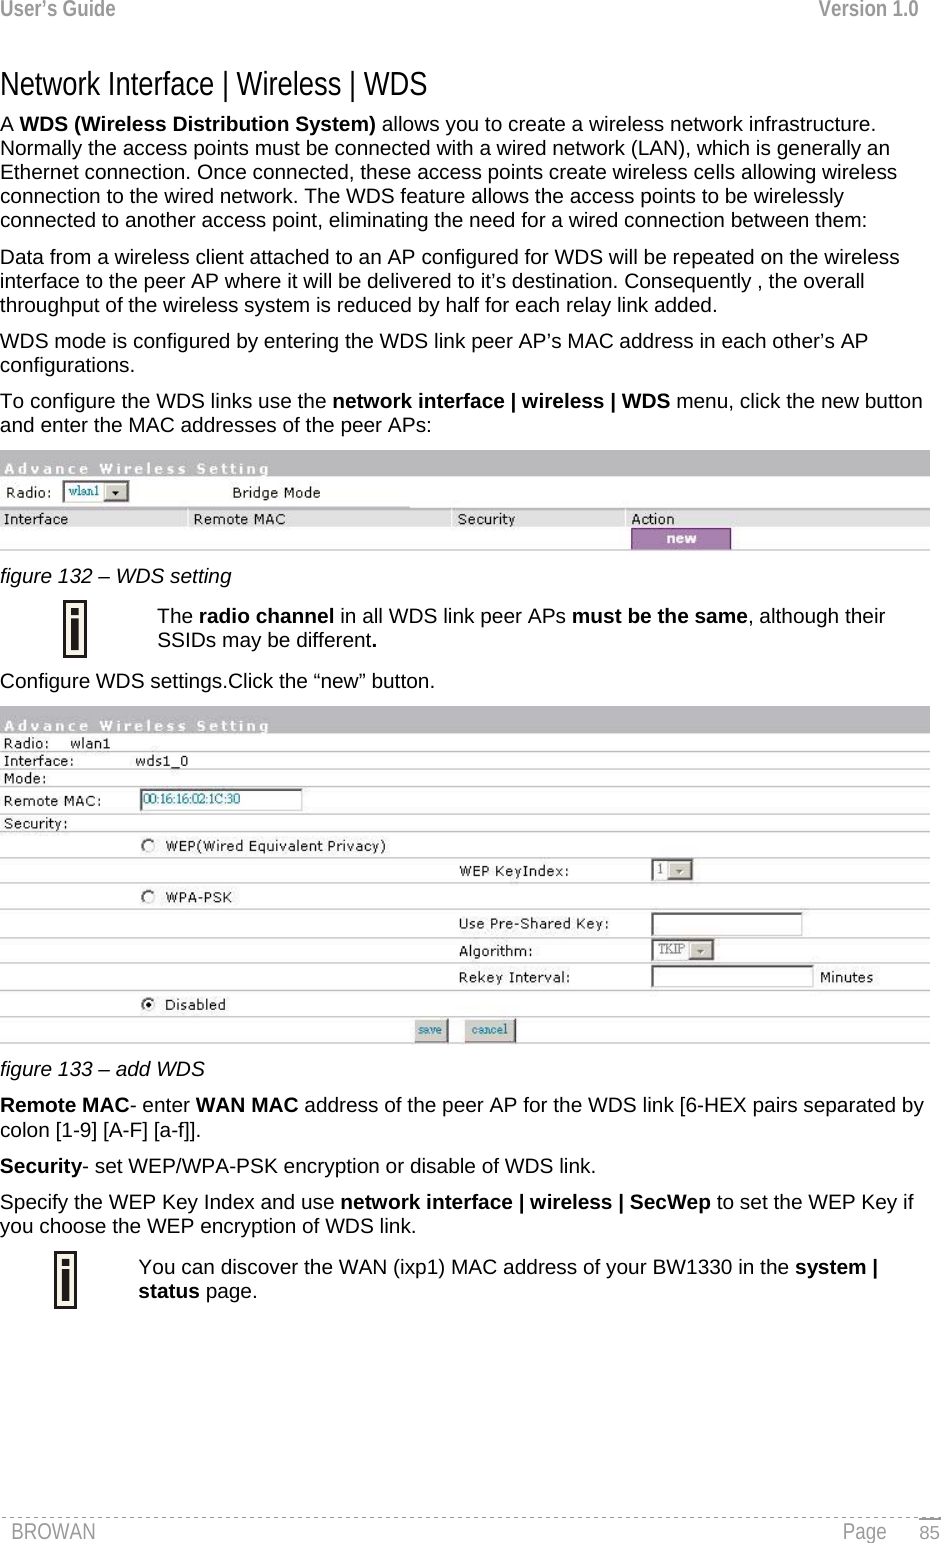 User’s Guide  Version 1.0  Network Interface | Wireless | WDS A WDS (Wireless Distribution System) allows you to create a wireless network infrastructure. Normally the access points must be connected with a wired network (LAN), which is generally an Ethernet connection. Once connected, these access points create wireless cells allowing wireless connection to the wired network. The WDS feature allows the access points to be wirelessly connected to another access point, eliminating the need for a wired connection between them:  Data from a wireless client attached to an AP configured for WDS will be repeated on the wireless interface to the peer AP where it will be delivered to it’s destination. Consequently , the overall throughput of the wireless system is reduced by half for each relay link added. WDS mode is configured by entering the WDS link peer AP’s MAC address in each other’s AP configurations. To configure the WDS links use the network interface | wireless | WDS menu, click the new button and enter the MAC addresses of the peer APs:  figure 132 – WDS setting  The radio channel in all WDS link peer APs must be the same, although their SSIDs may be different. Configure WDS settings.Click the “new” button.  figure 133 – add WDS Remote MAC- enter WAN MAC address of the peer AP for the WDS link [6-HEX pairs separated by colon [1-9] [A-F] [a-f]]. Security- set WEP/WPA-PSK encryption or disable of WDS link. Specify the WEP Key Index and use network interface | wireless | SecWep to set the WEP Key if you choose the WEP encryption of WDS link.   You can discover the WAN (ixp1) MAC address of your BW1330 in the system | status page.     BROWAN                                                                                                                                               Page   85